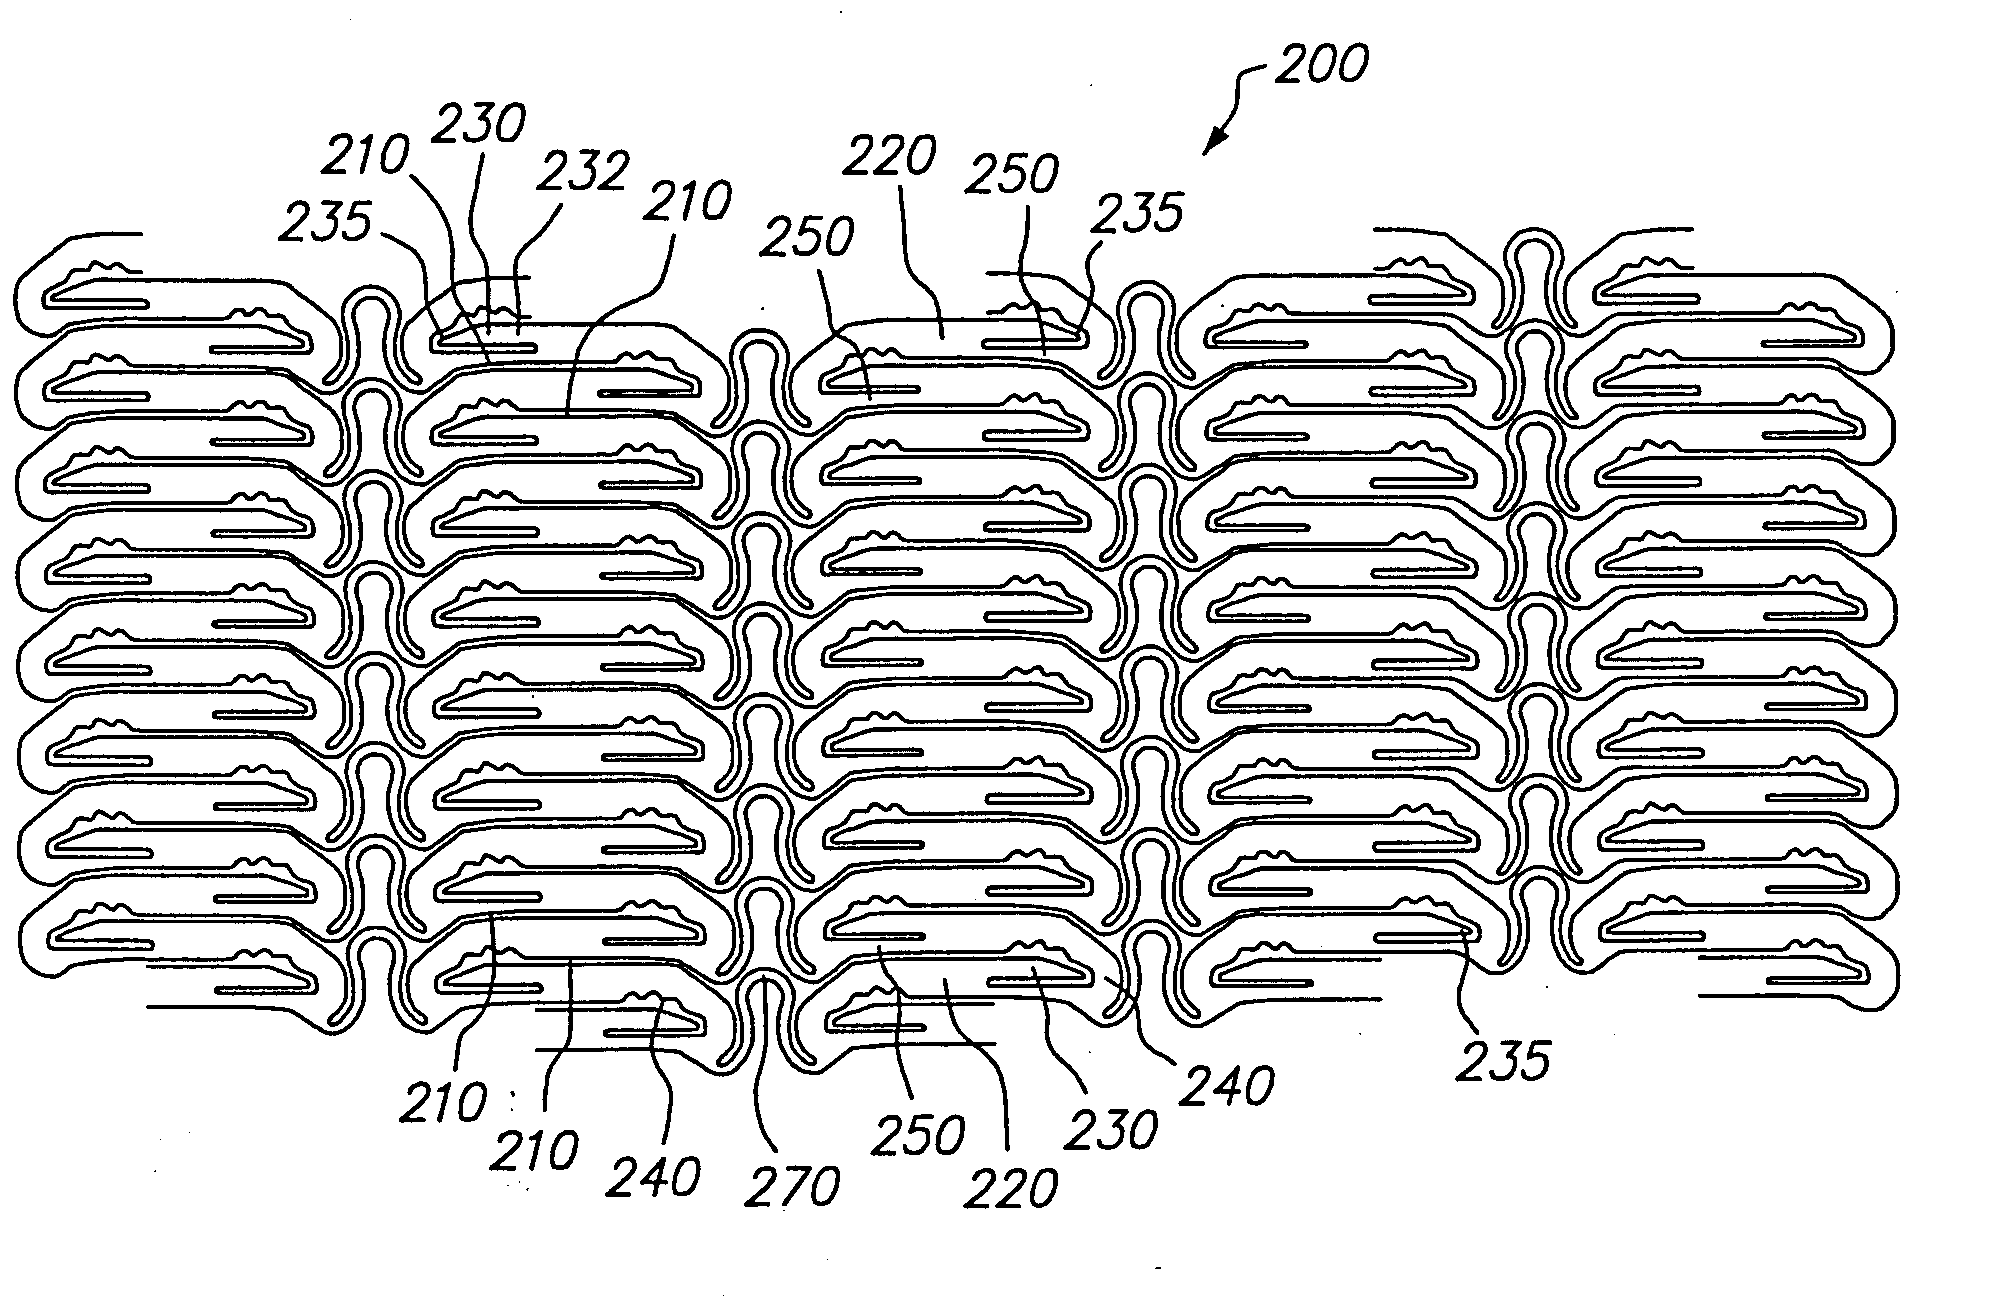 Expandable medical device with locking mechanism